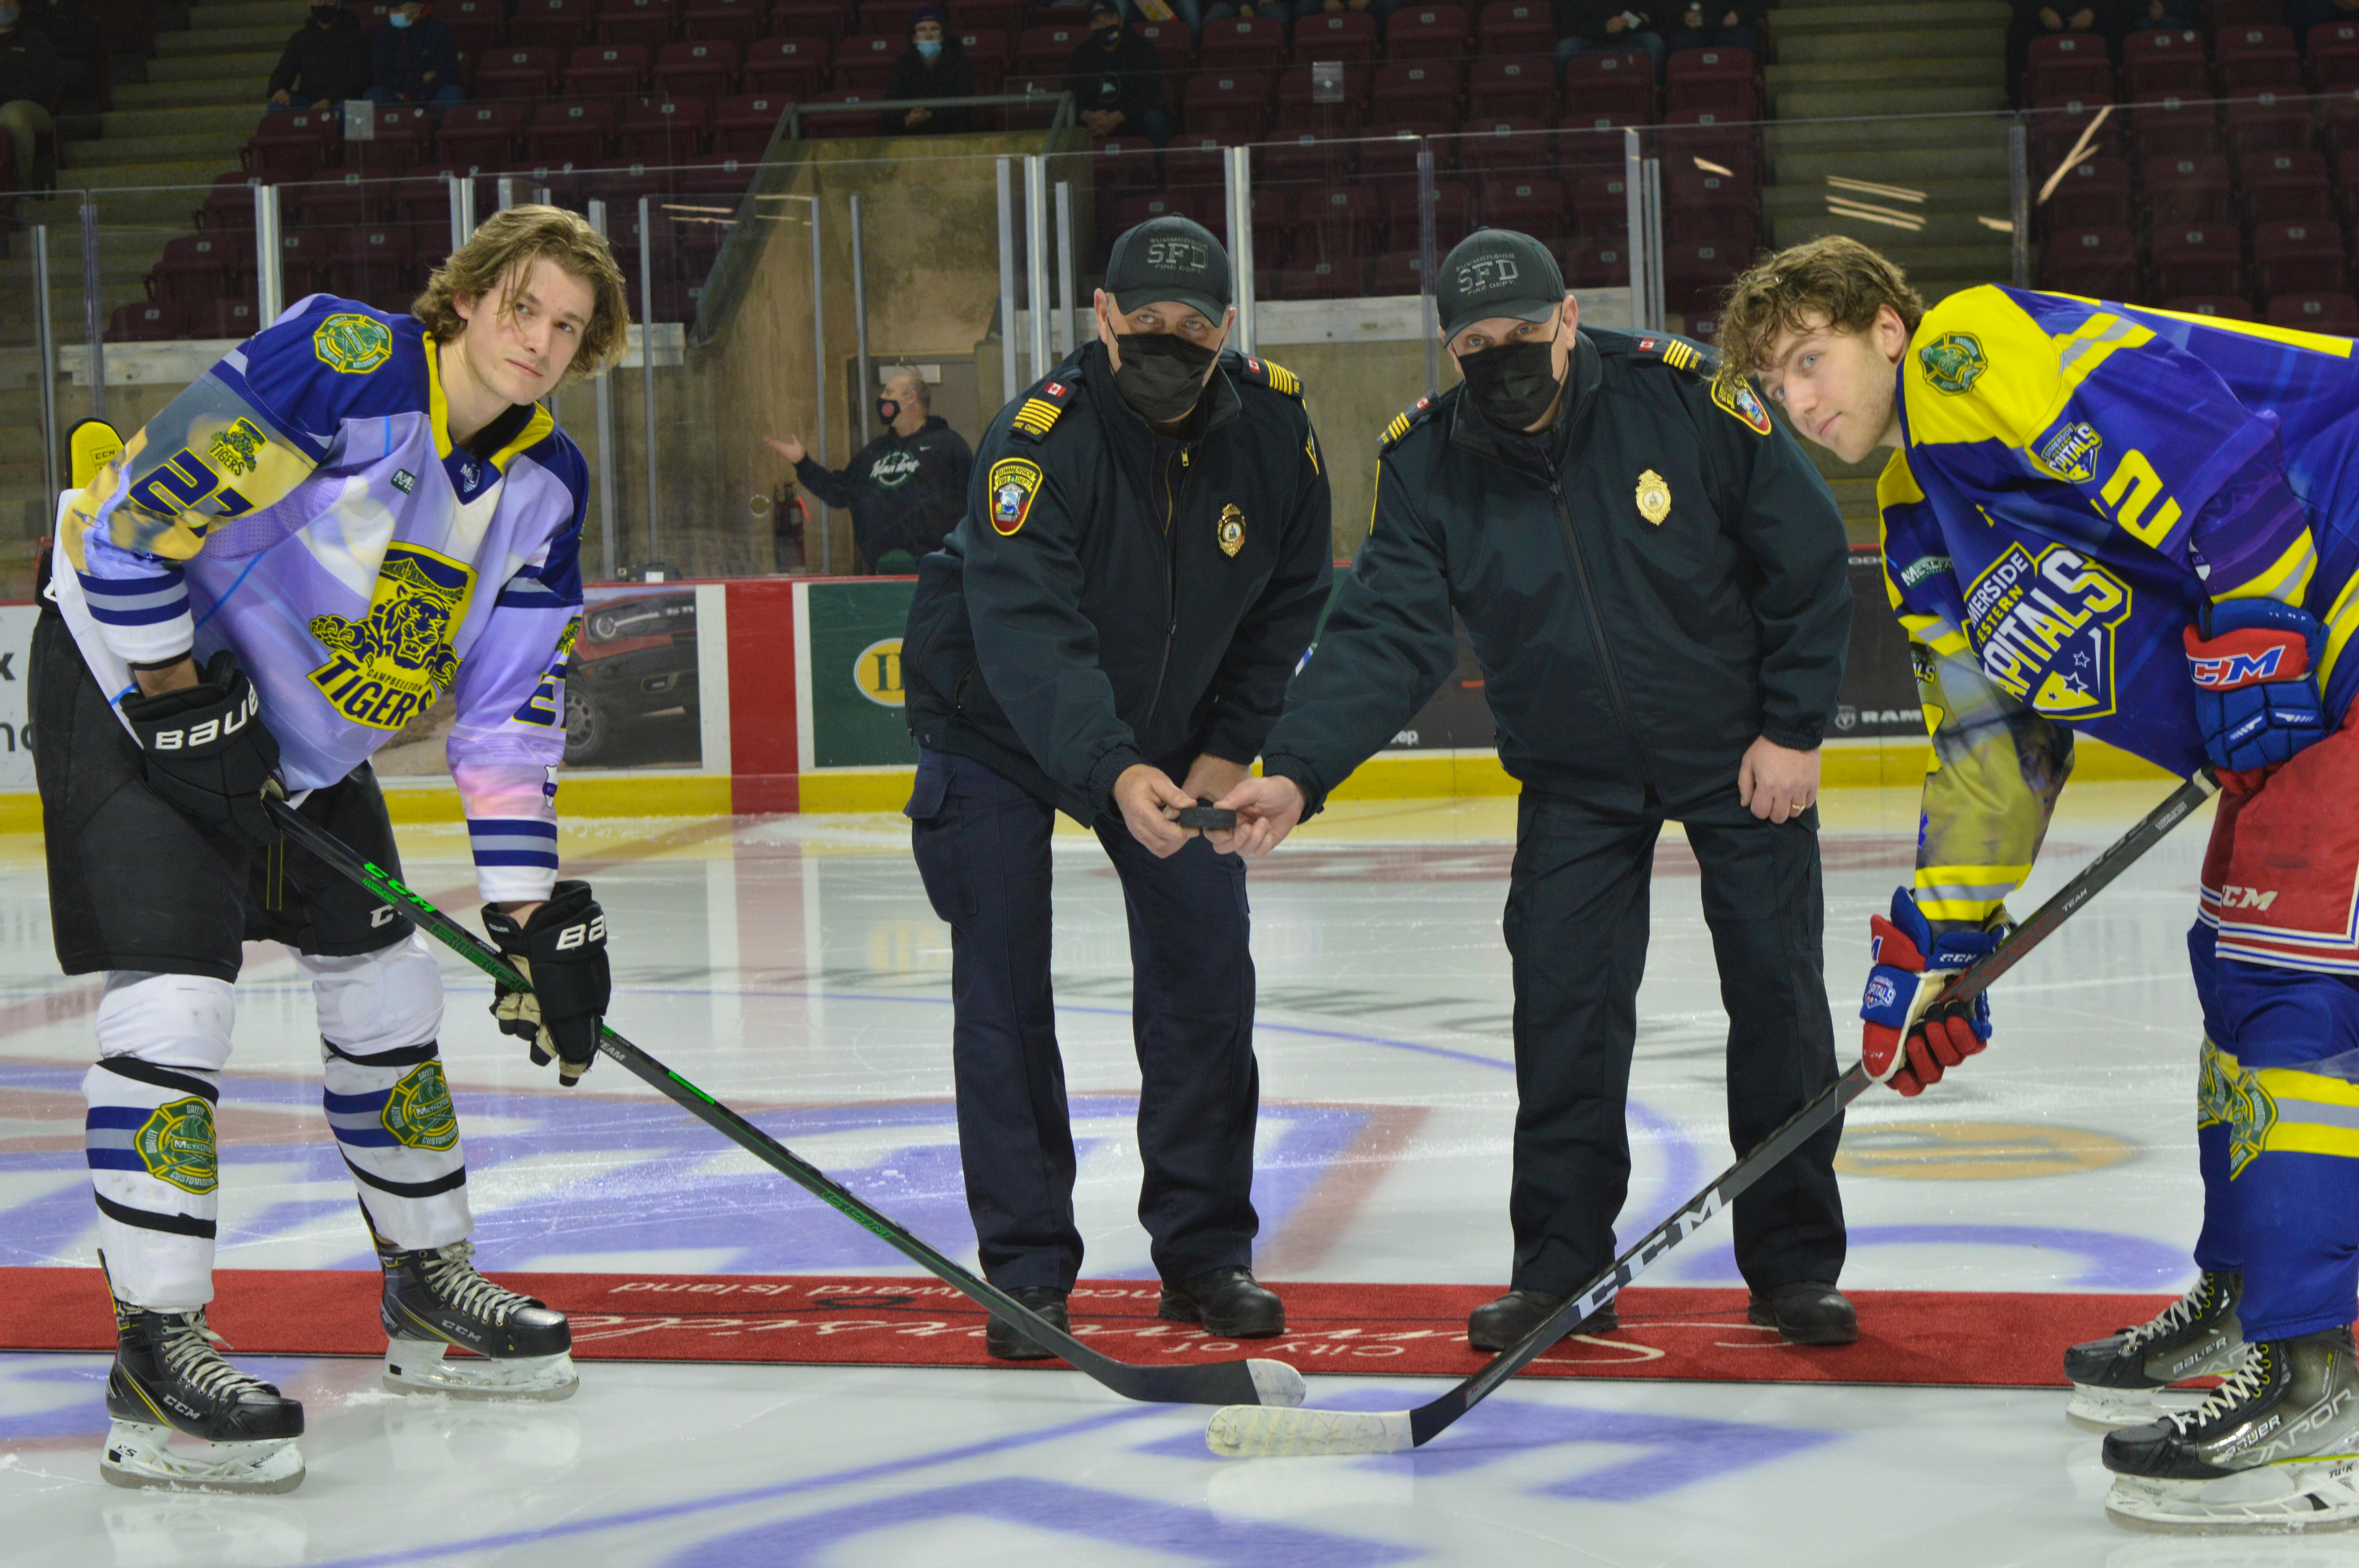 Summerside fire Chief Ron Enman, left, and deputy chief Kenny Blanchard drop the puck for the ceremonial faceoff between Summerside Western Capitals foward Colby MacArthur and Campbellton Tigers forward Jordan Briere on Saturday, March 5. The Capitals and Tigers honoured first responders in the region during a pre-game ceremony as part of a league-wide initiative.
